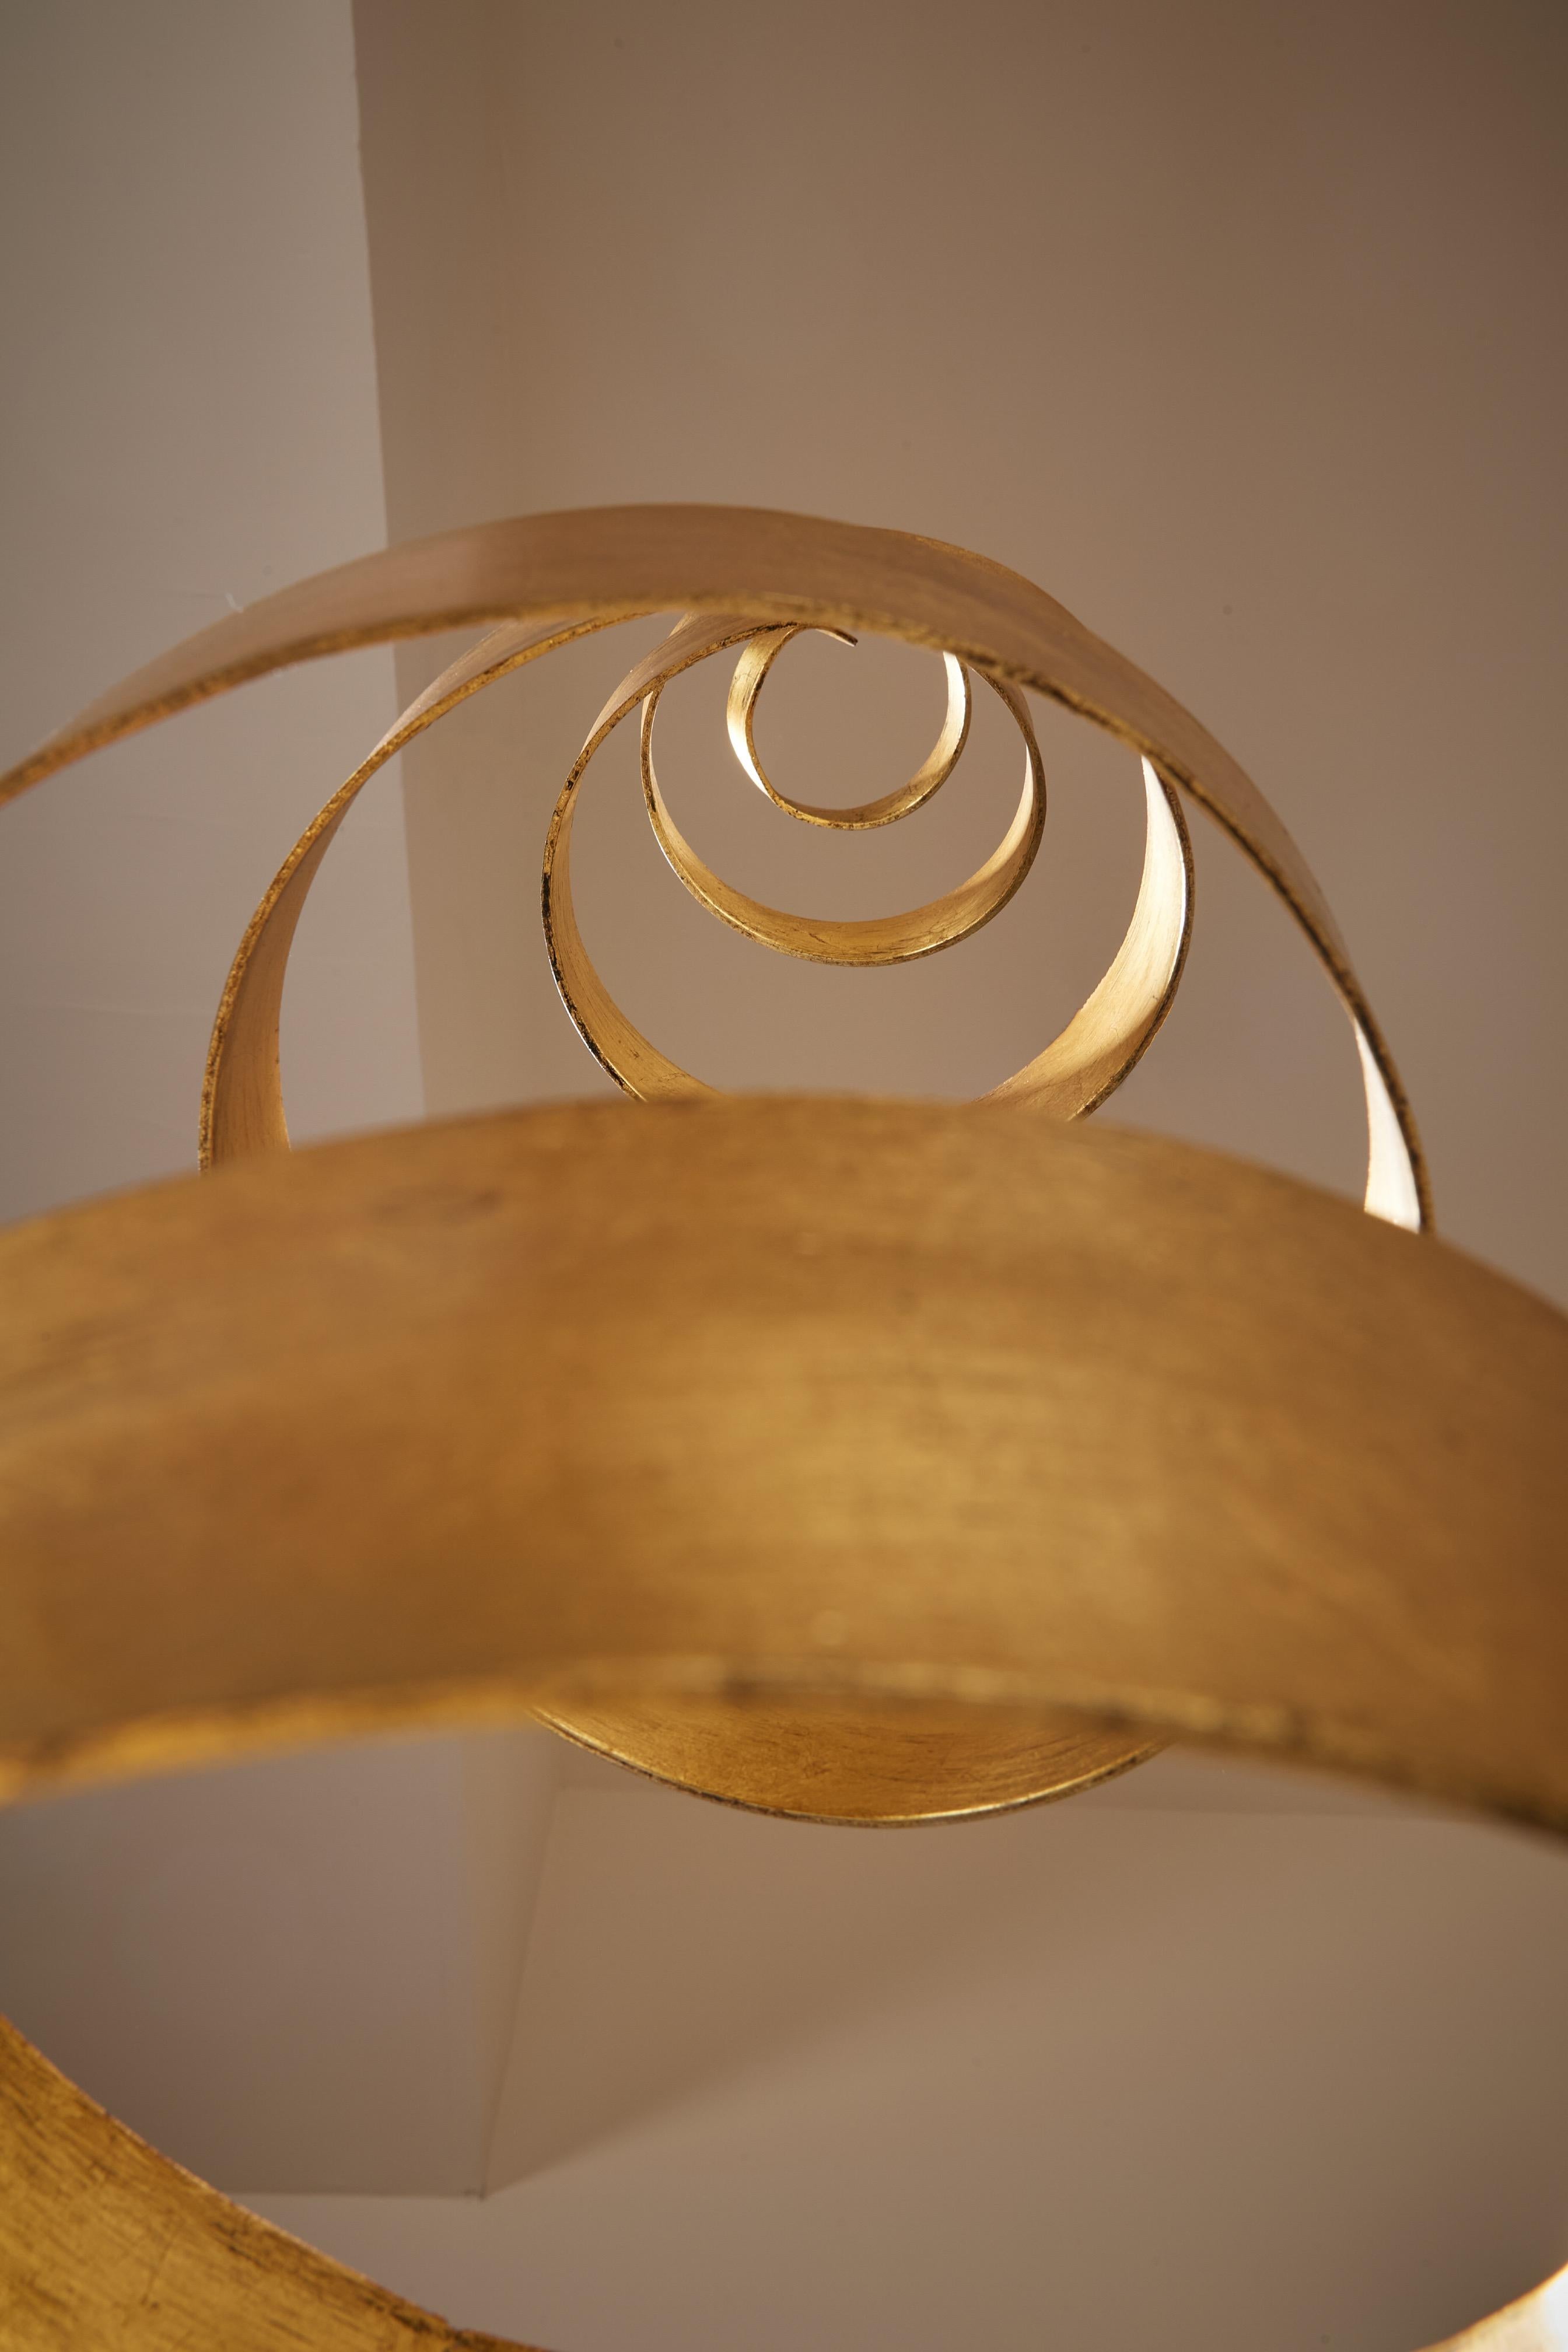 Tom Dixon, Early Pair of Kinetic Gold Leaf Spiral Floor Lamps, UK 1988 For Sale 6